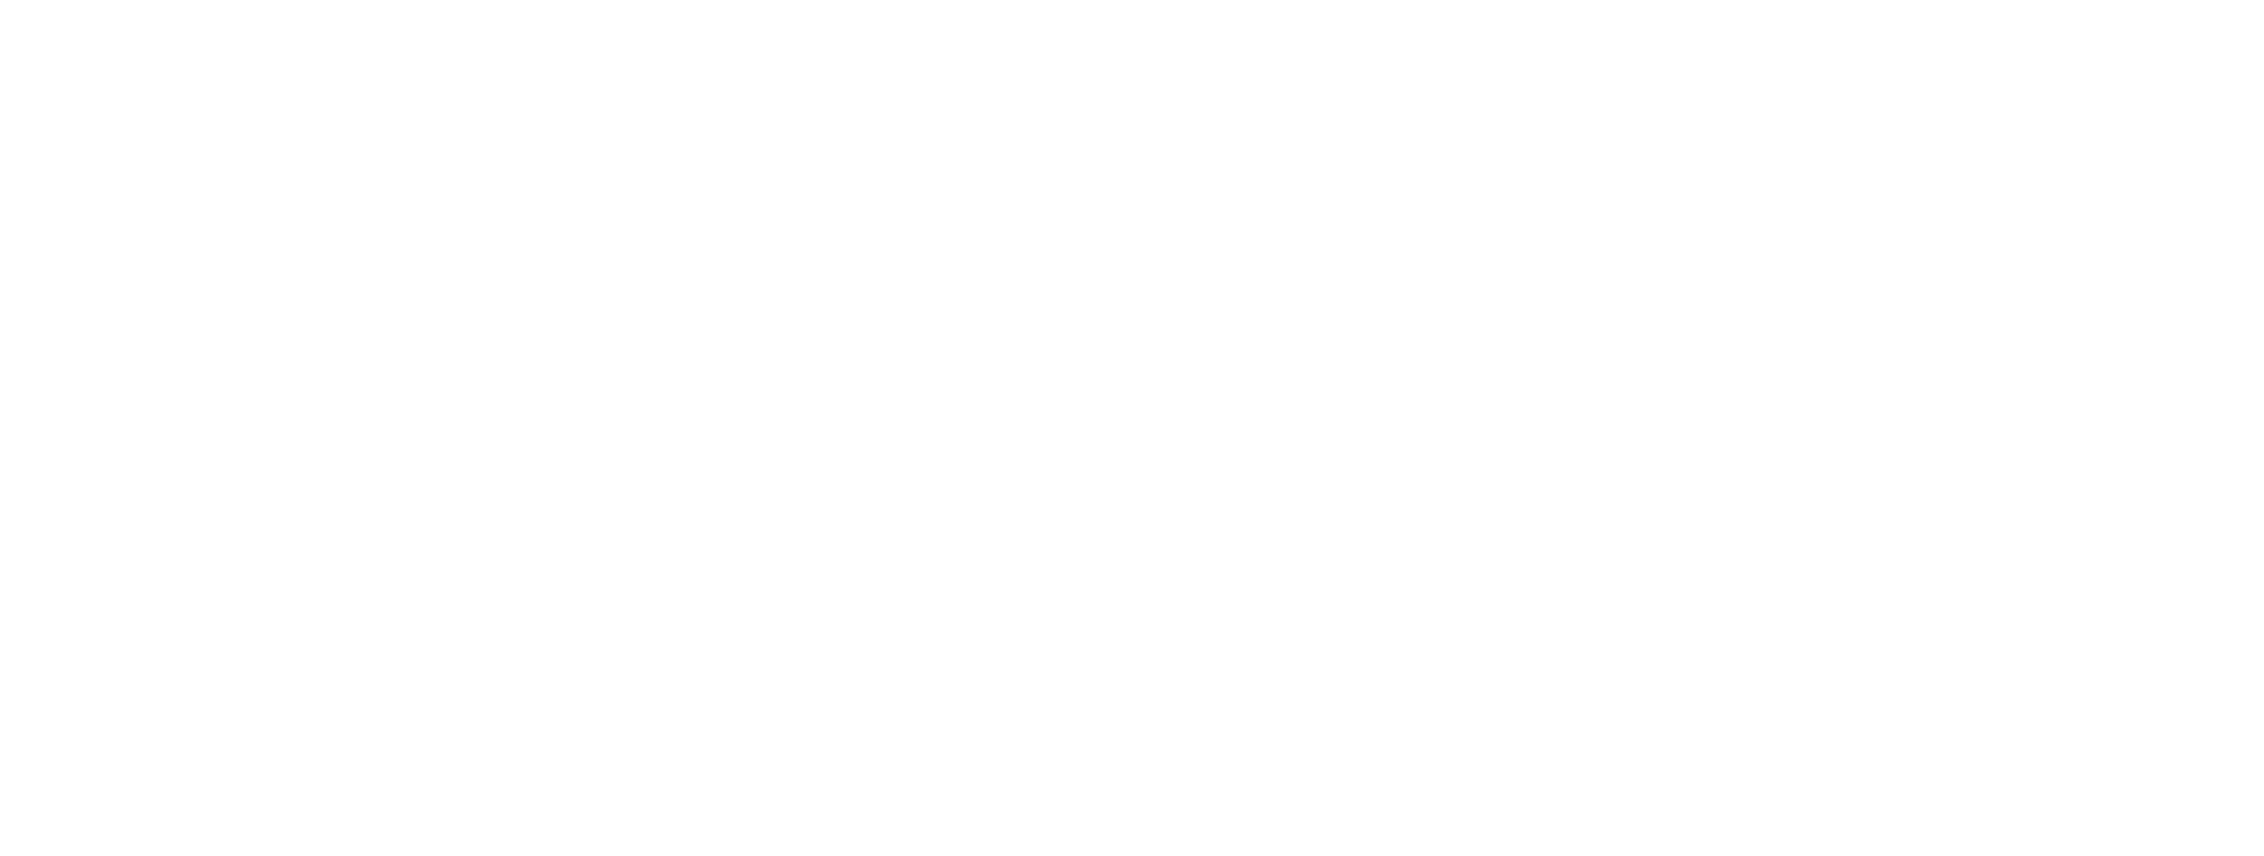 Cleaning services | Berrills Blast, Cleaning & Services Ltd